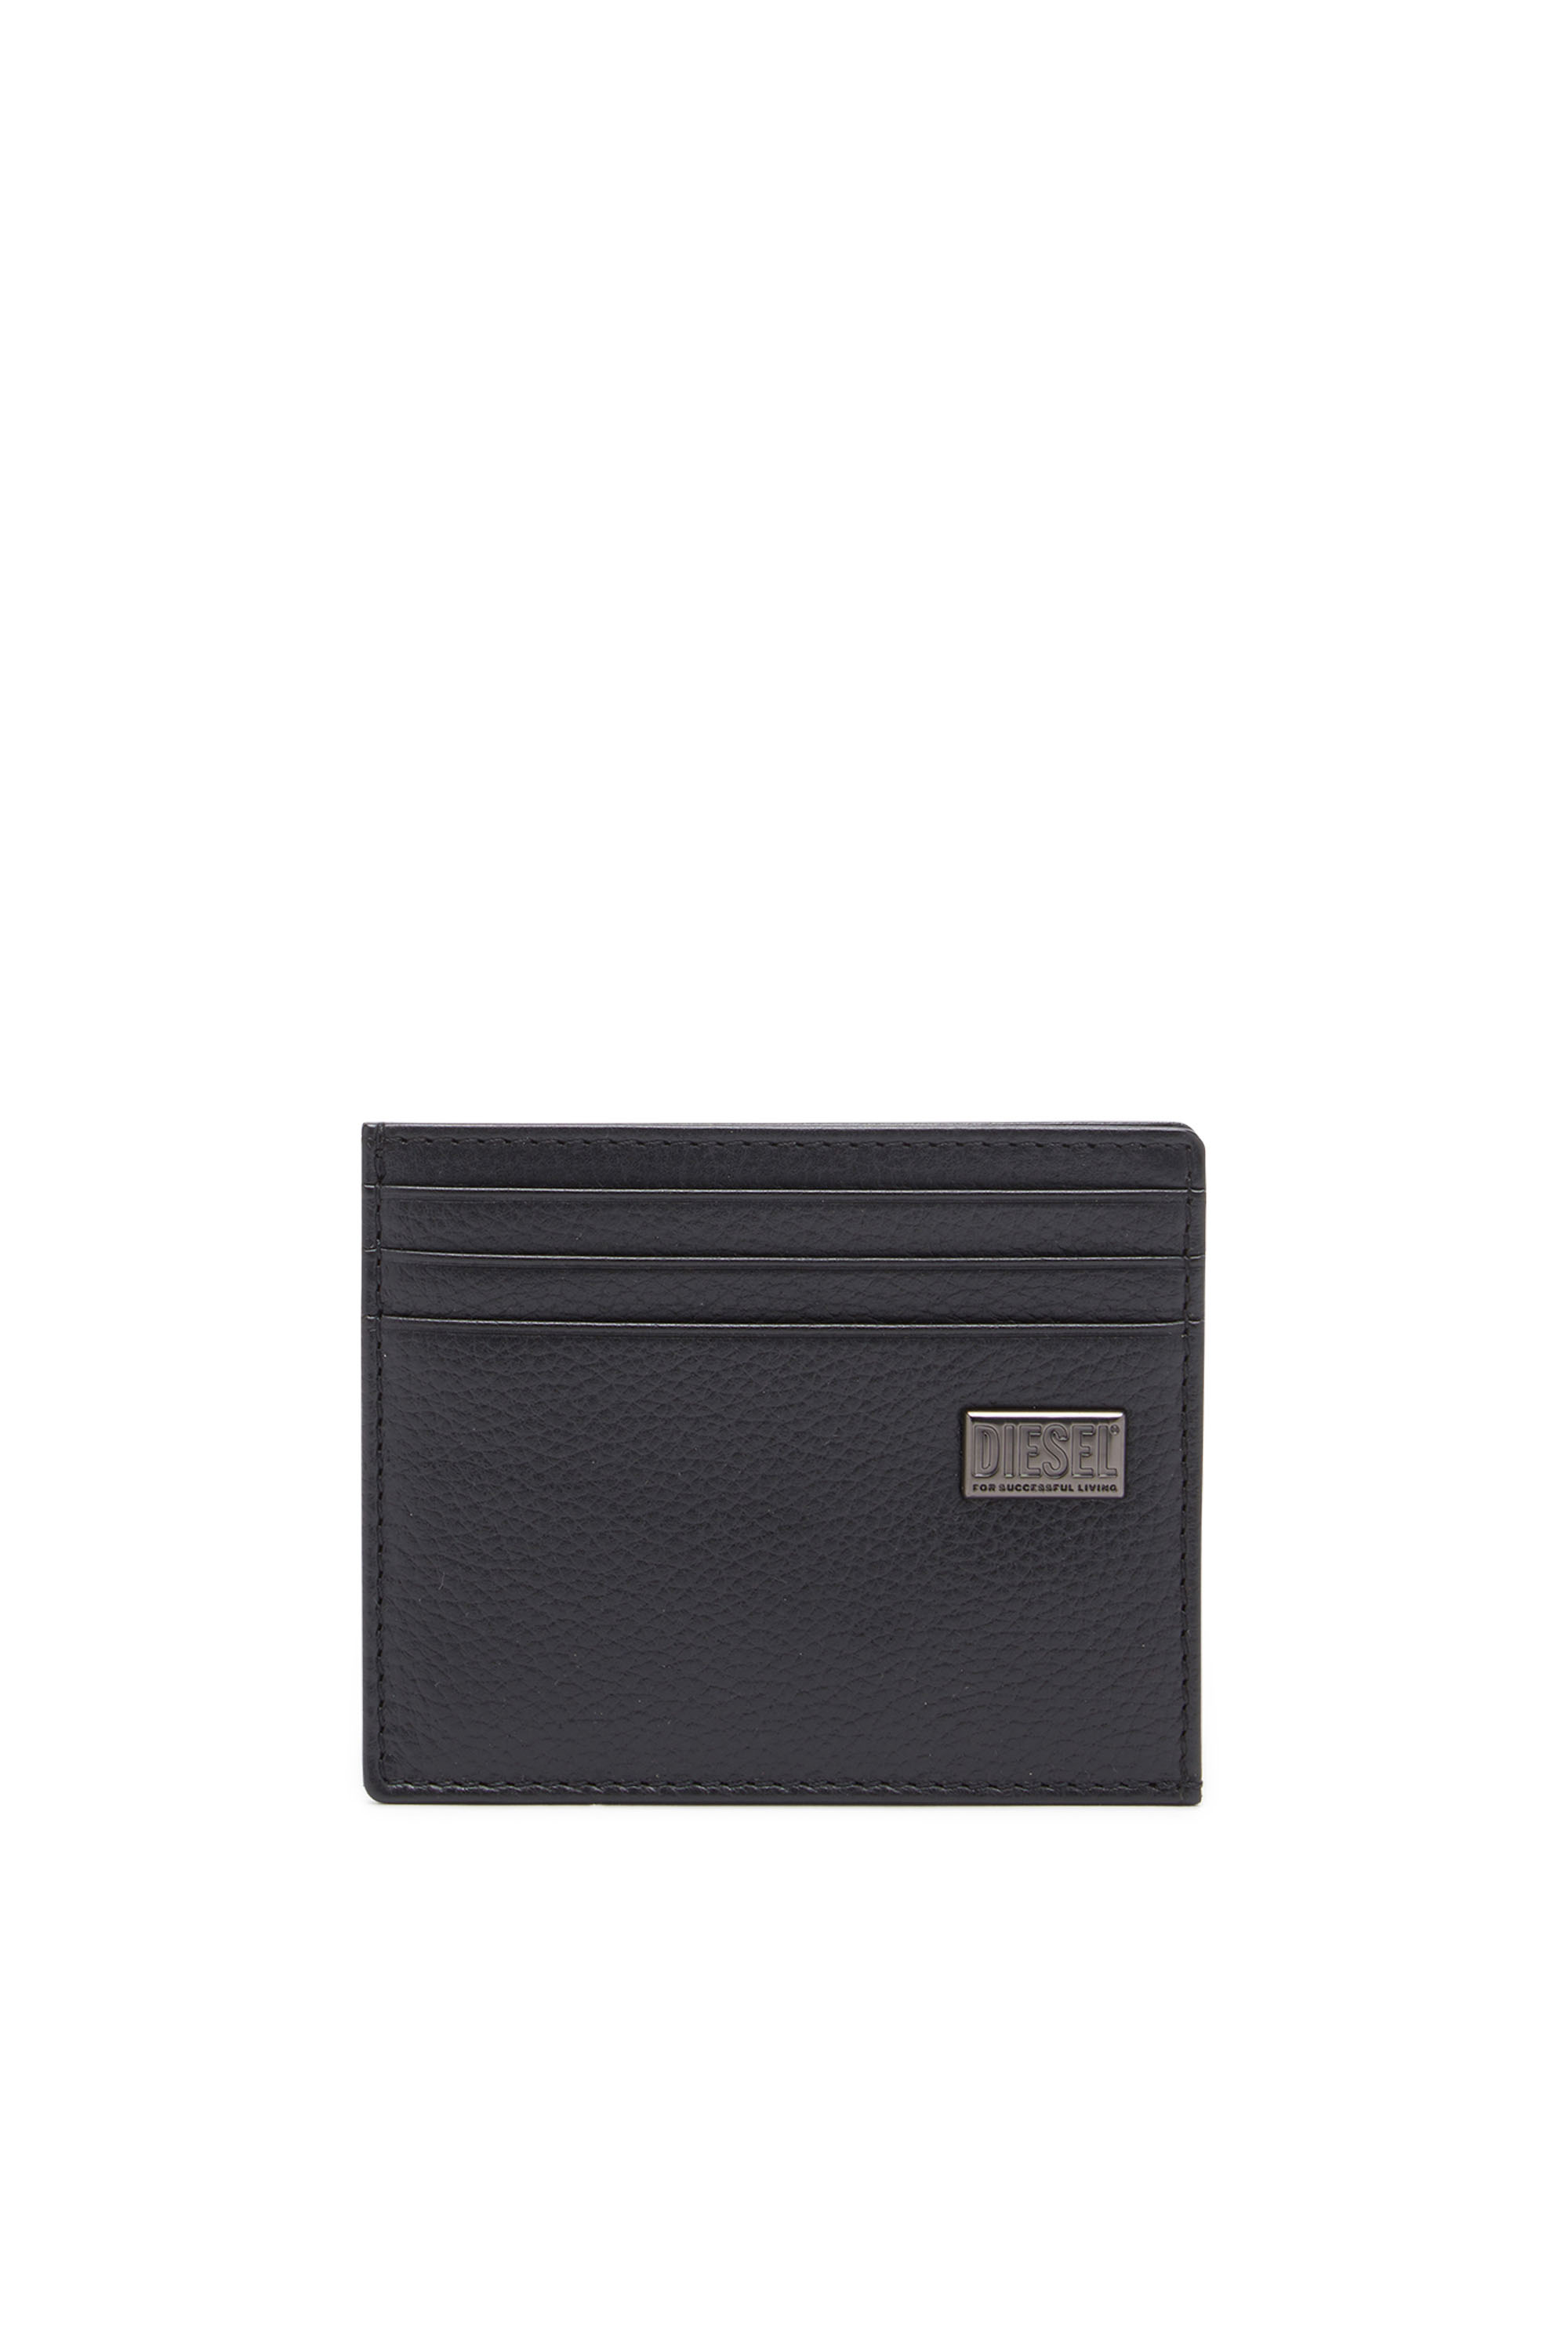 Diesel - Card holder in grainy leather - Small Wallets - Man - Black